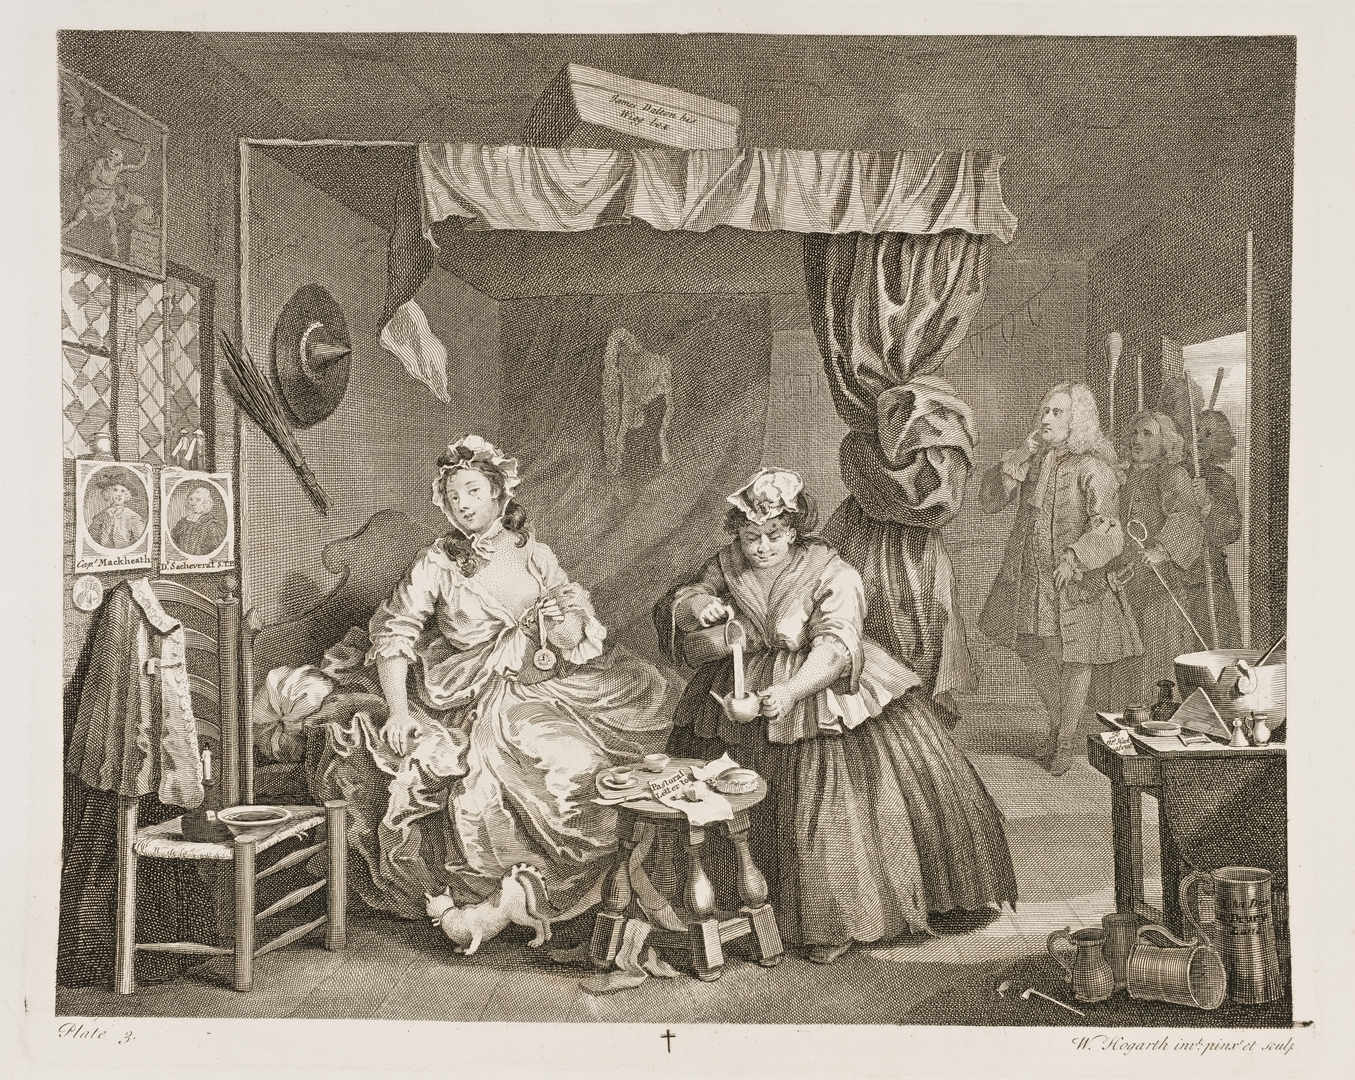 an engraving by William Hogart featuring Moll